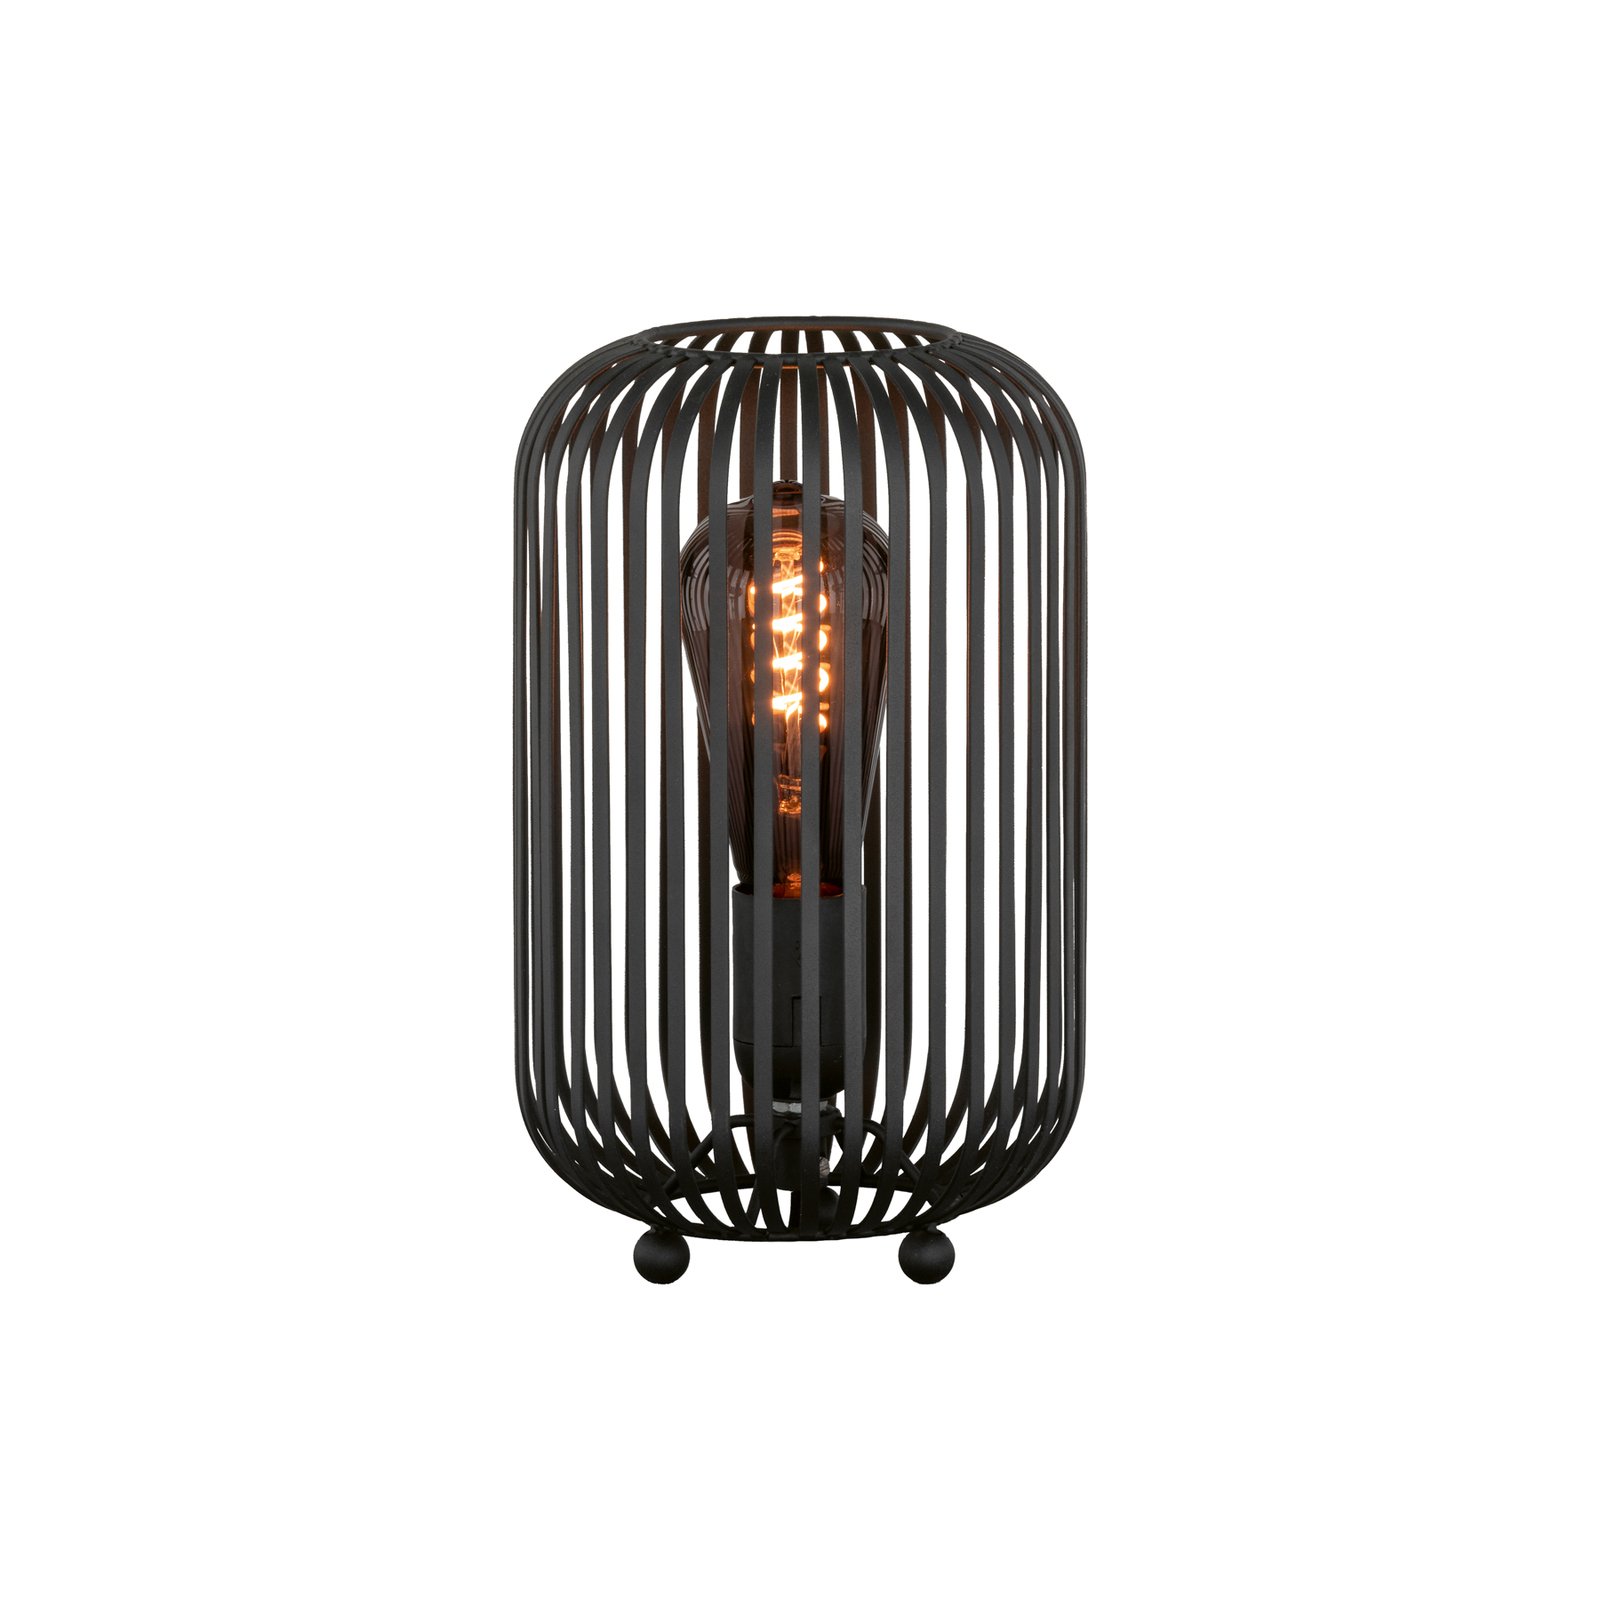 Schöner Wohnen Cage table lamp cage lampshade